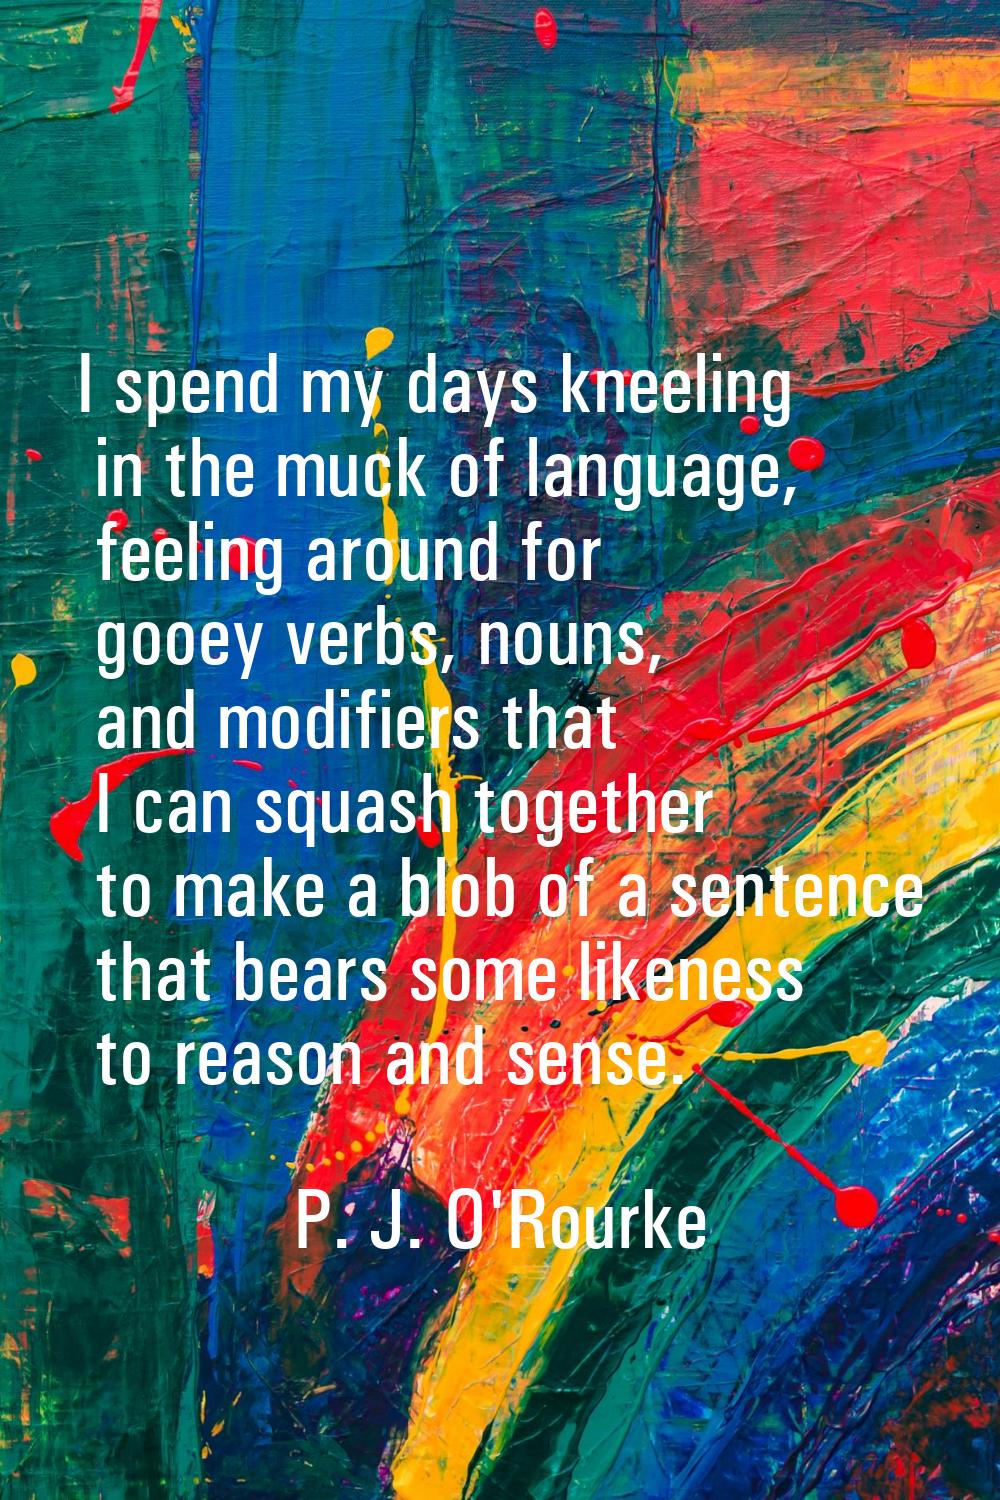 I spend my days kneeling in the muck of language, feeling around for gooey verbs, nouns, and modifi